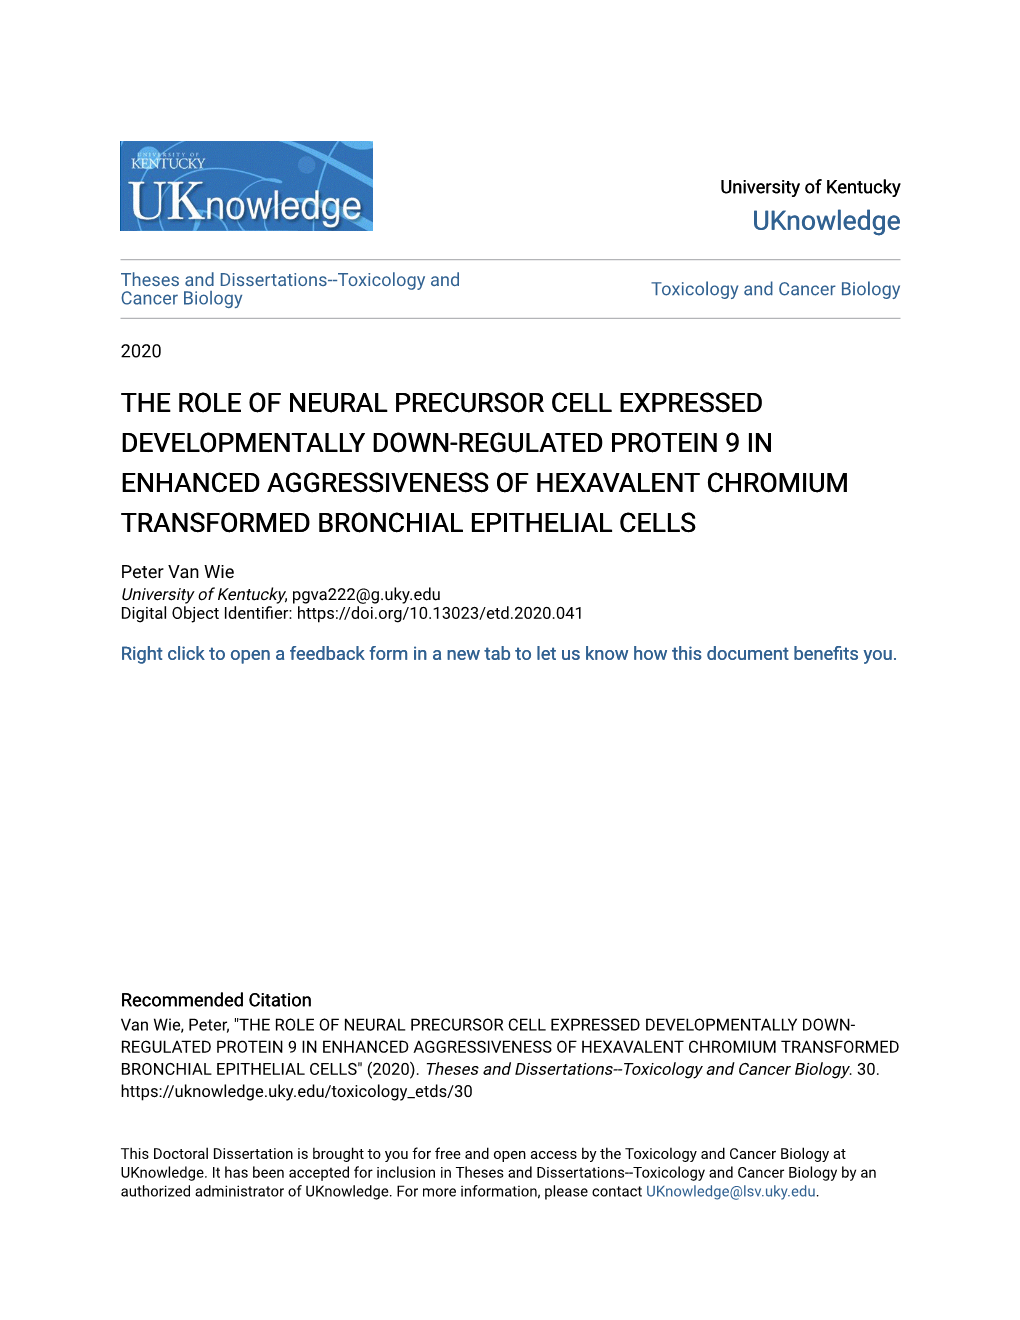 The Role of Neural Precursor Cell Expressed